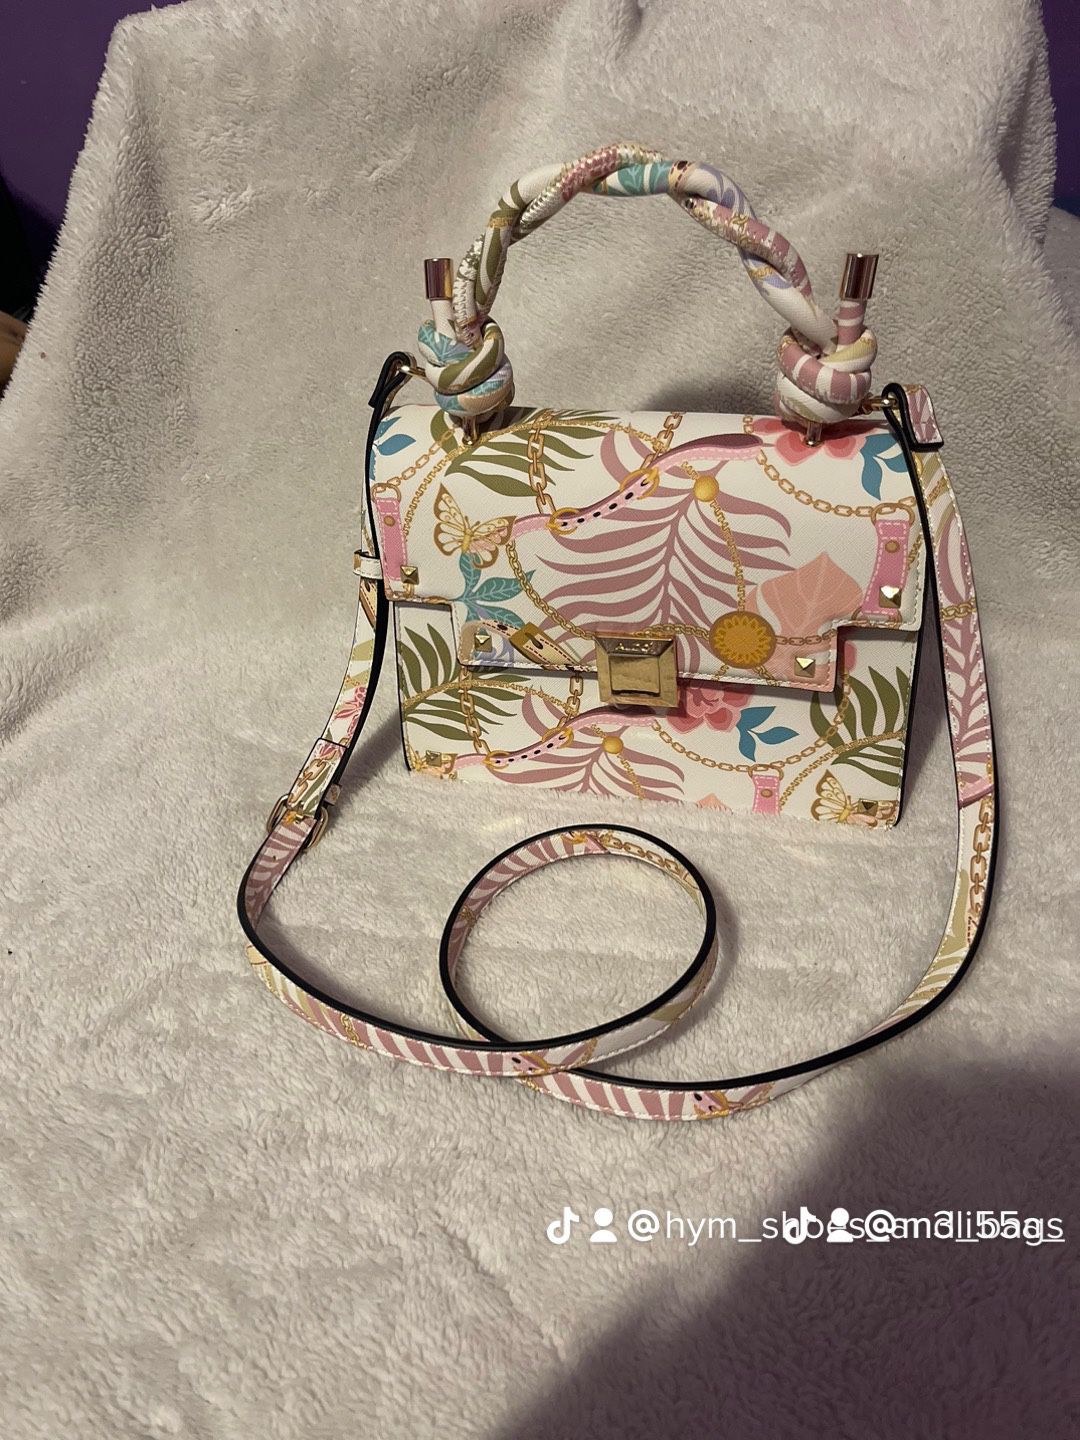 ALDO BAGS %Original for Sale in New York, NY - OfferUp